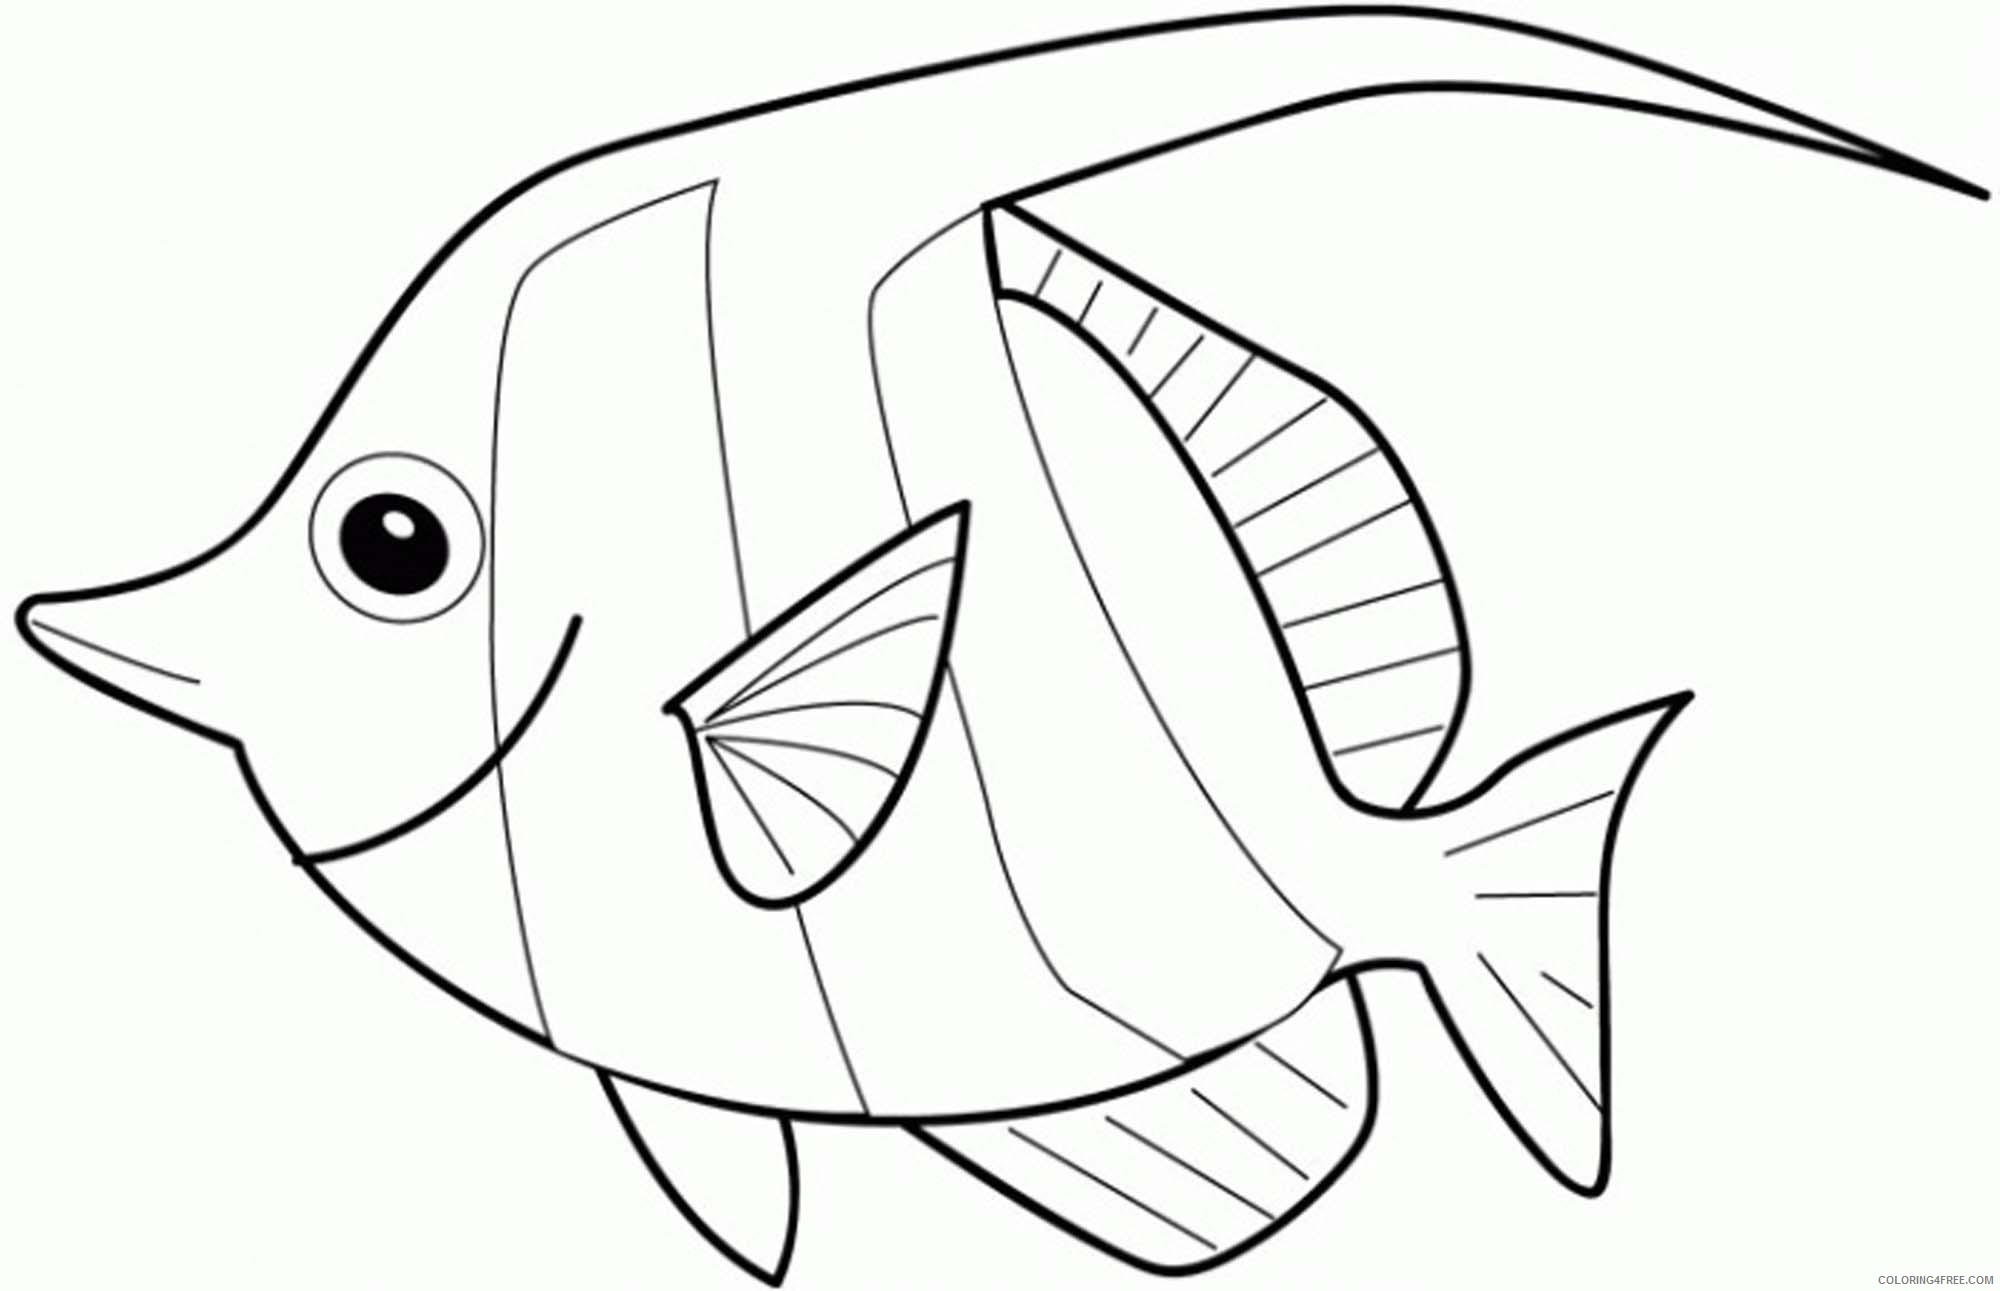 angel fish coloring pages printable Coloring4free